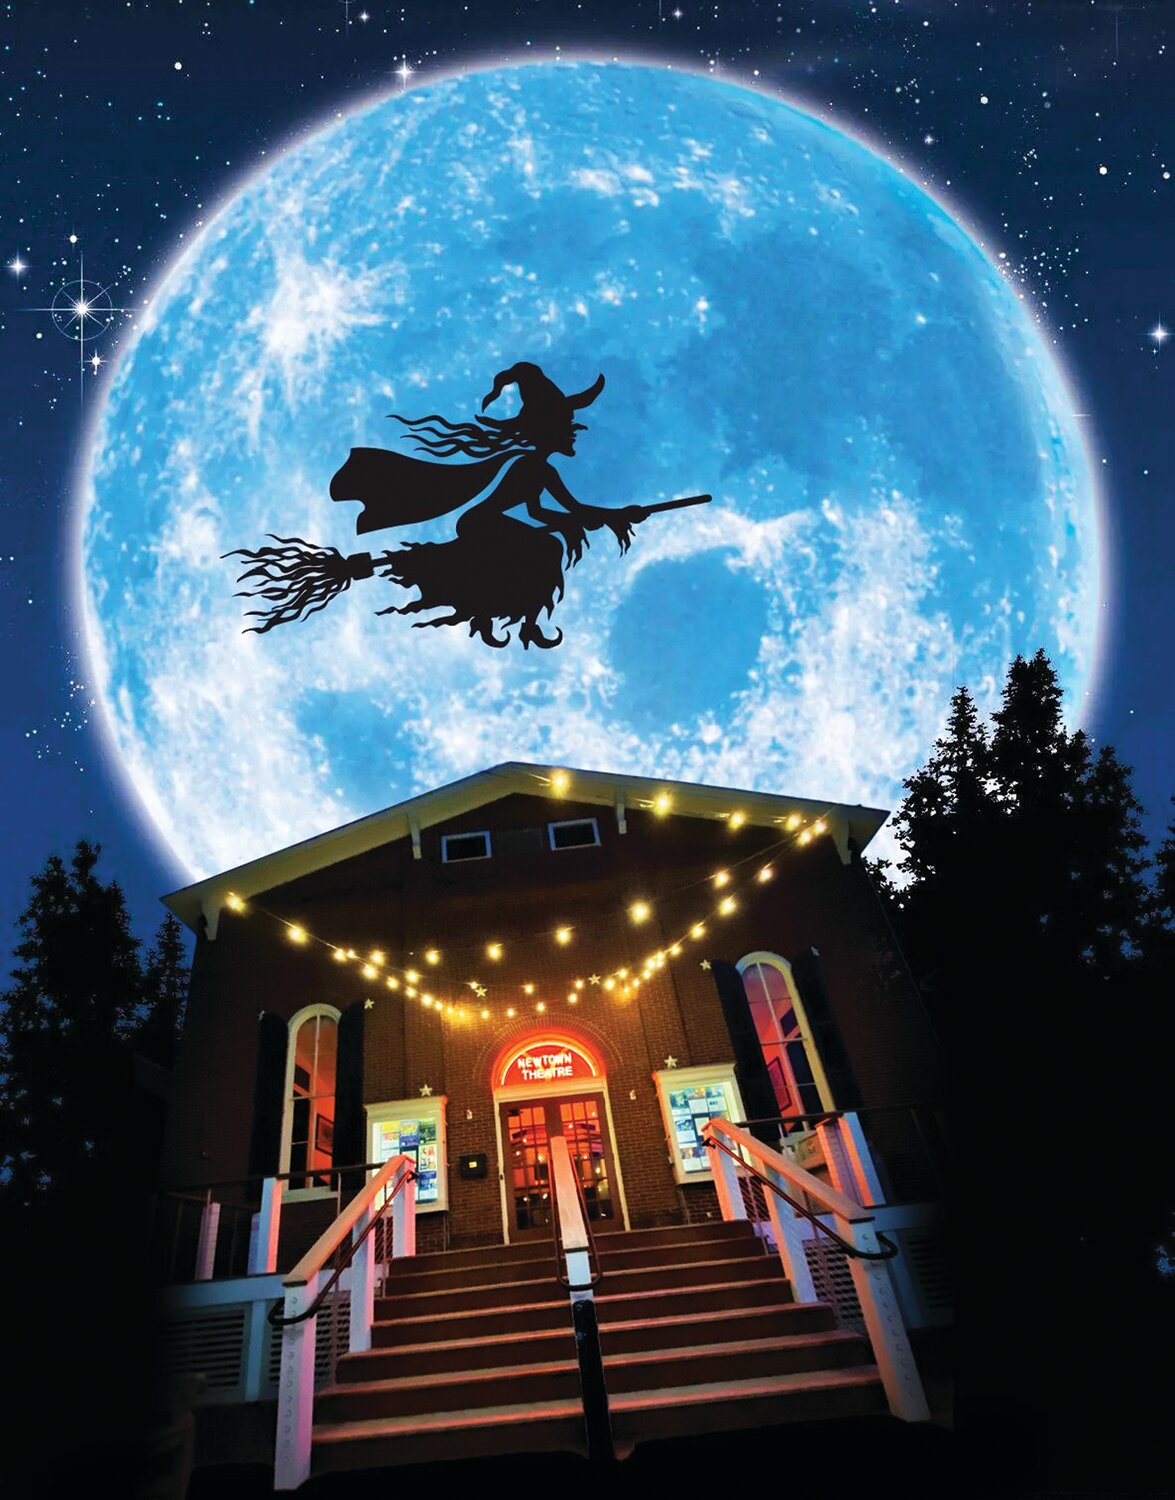 A witch “flies” over the Newtown Theatre.